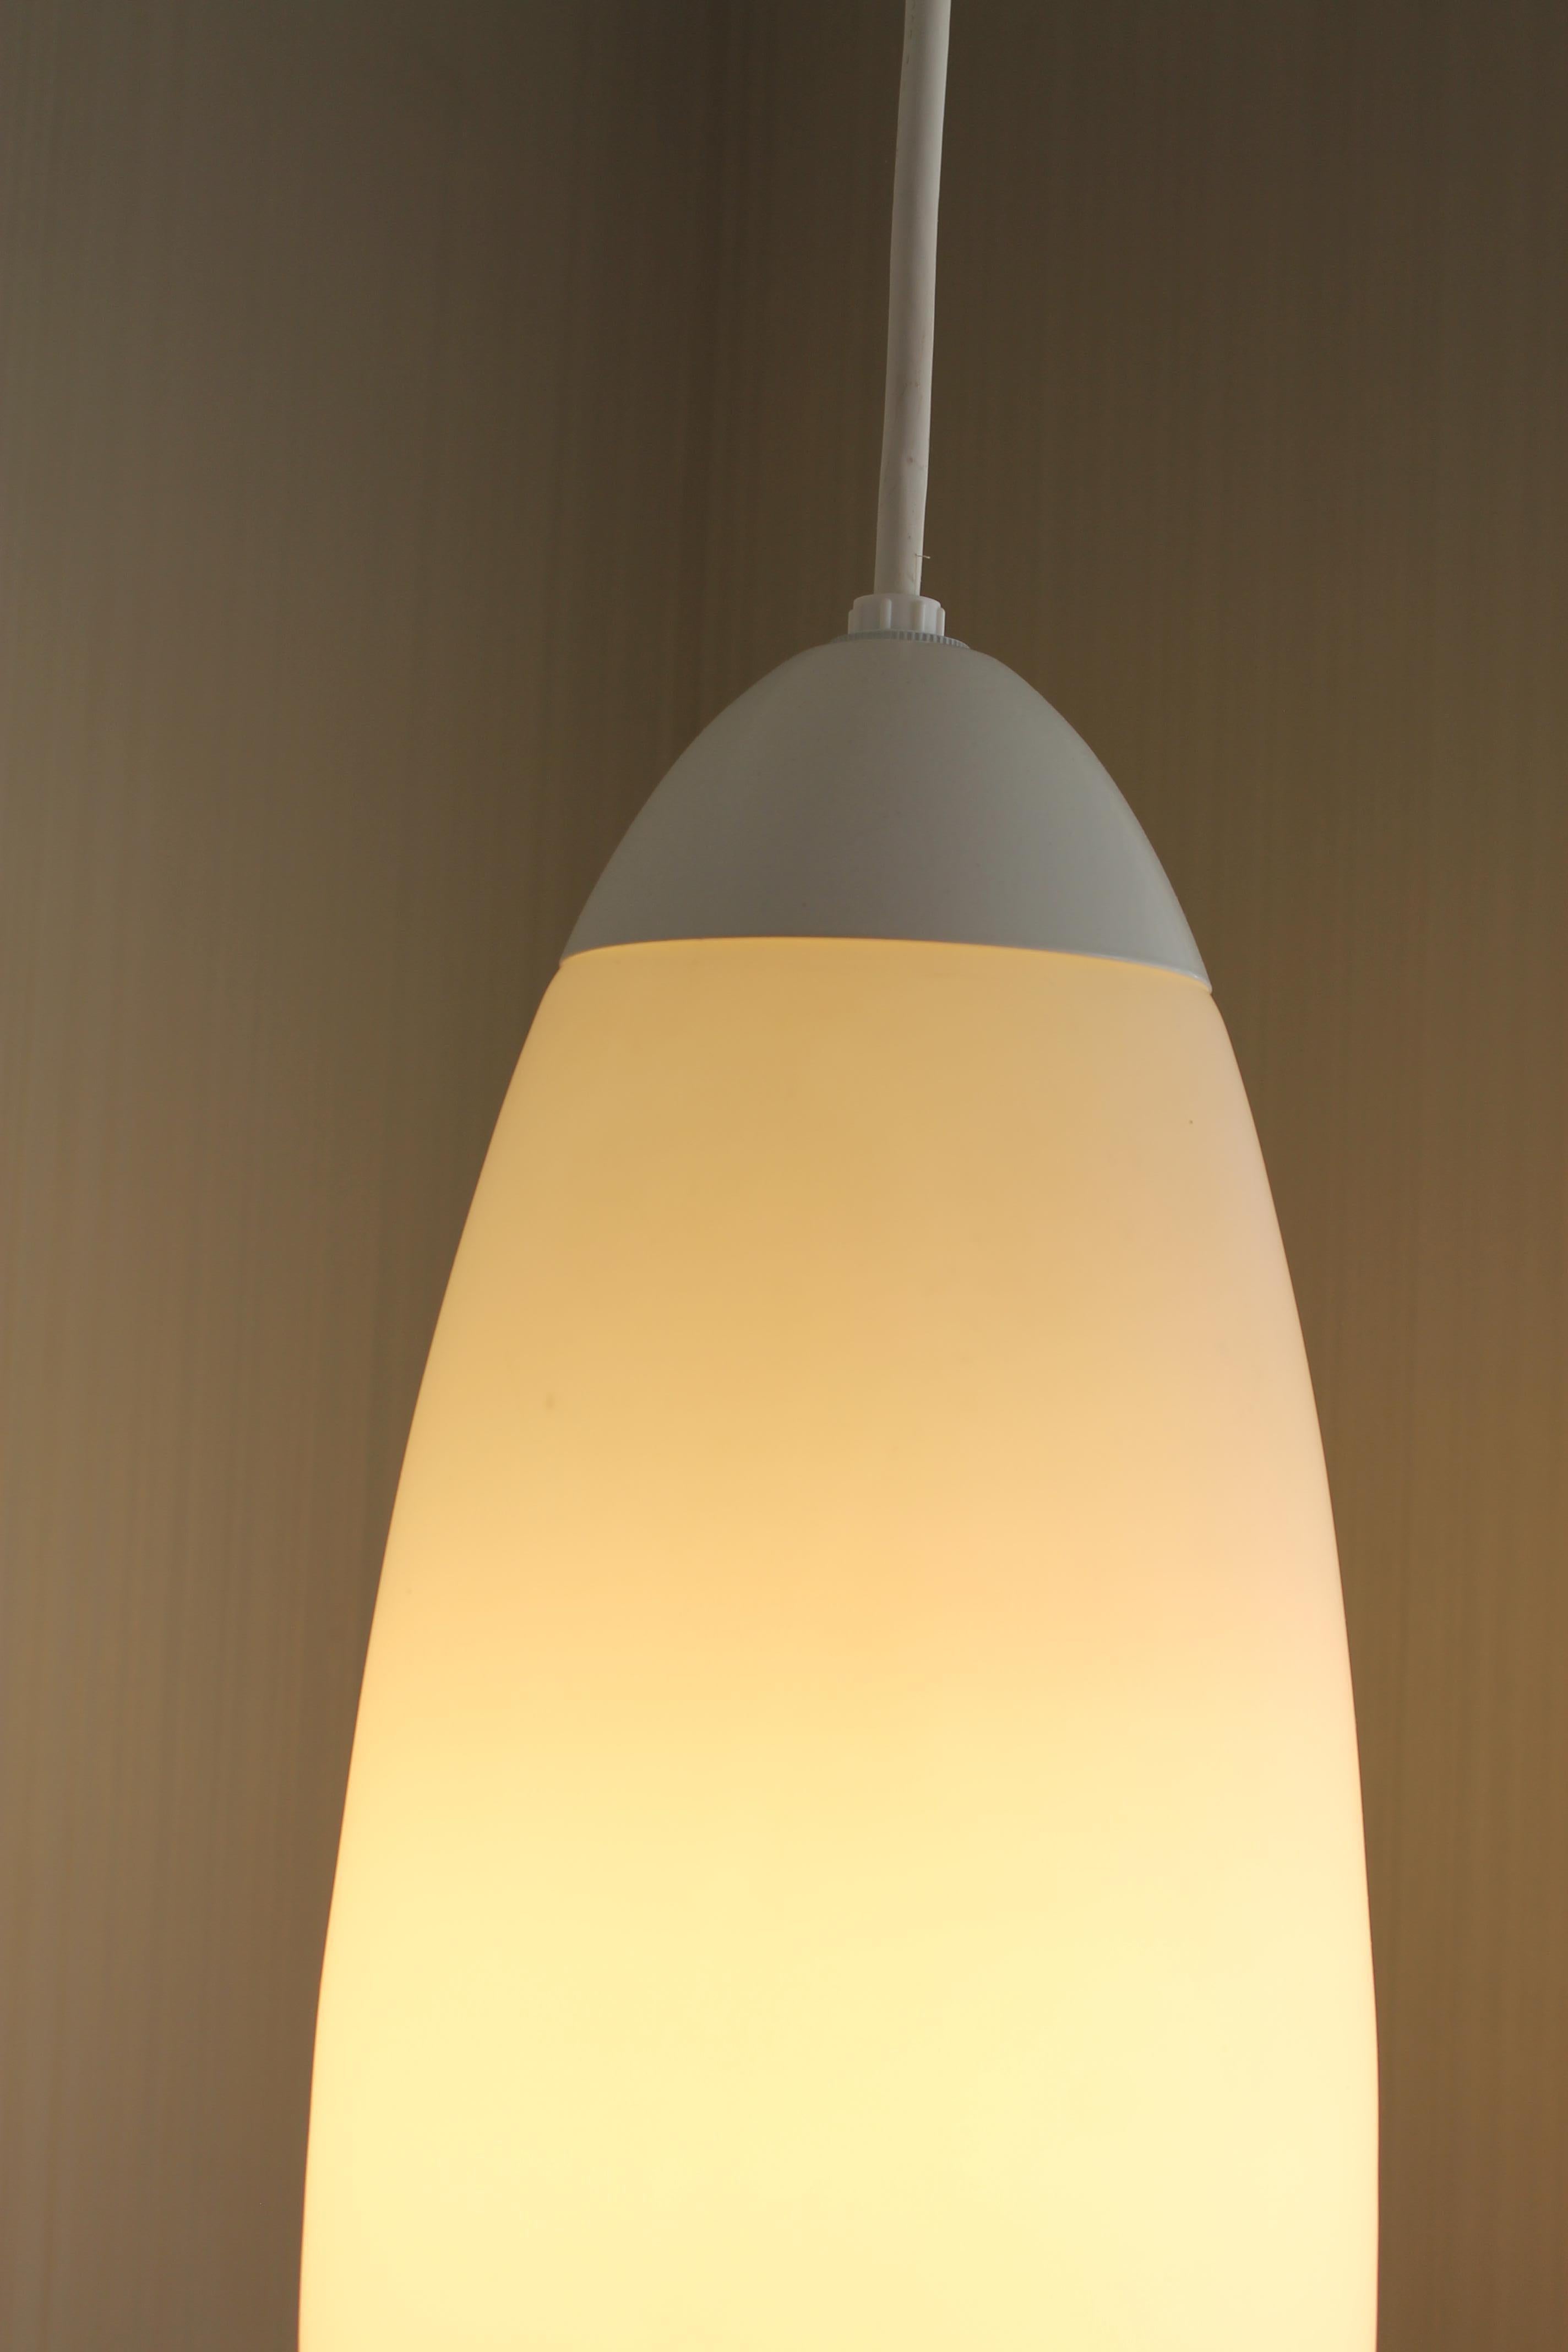 Late 20th Century Elongated Mid-Century Modern Hanging Pendant Lamp For Sale